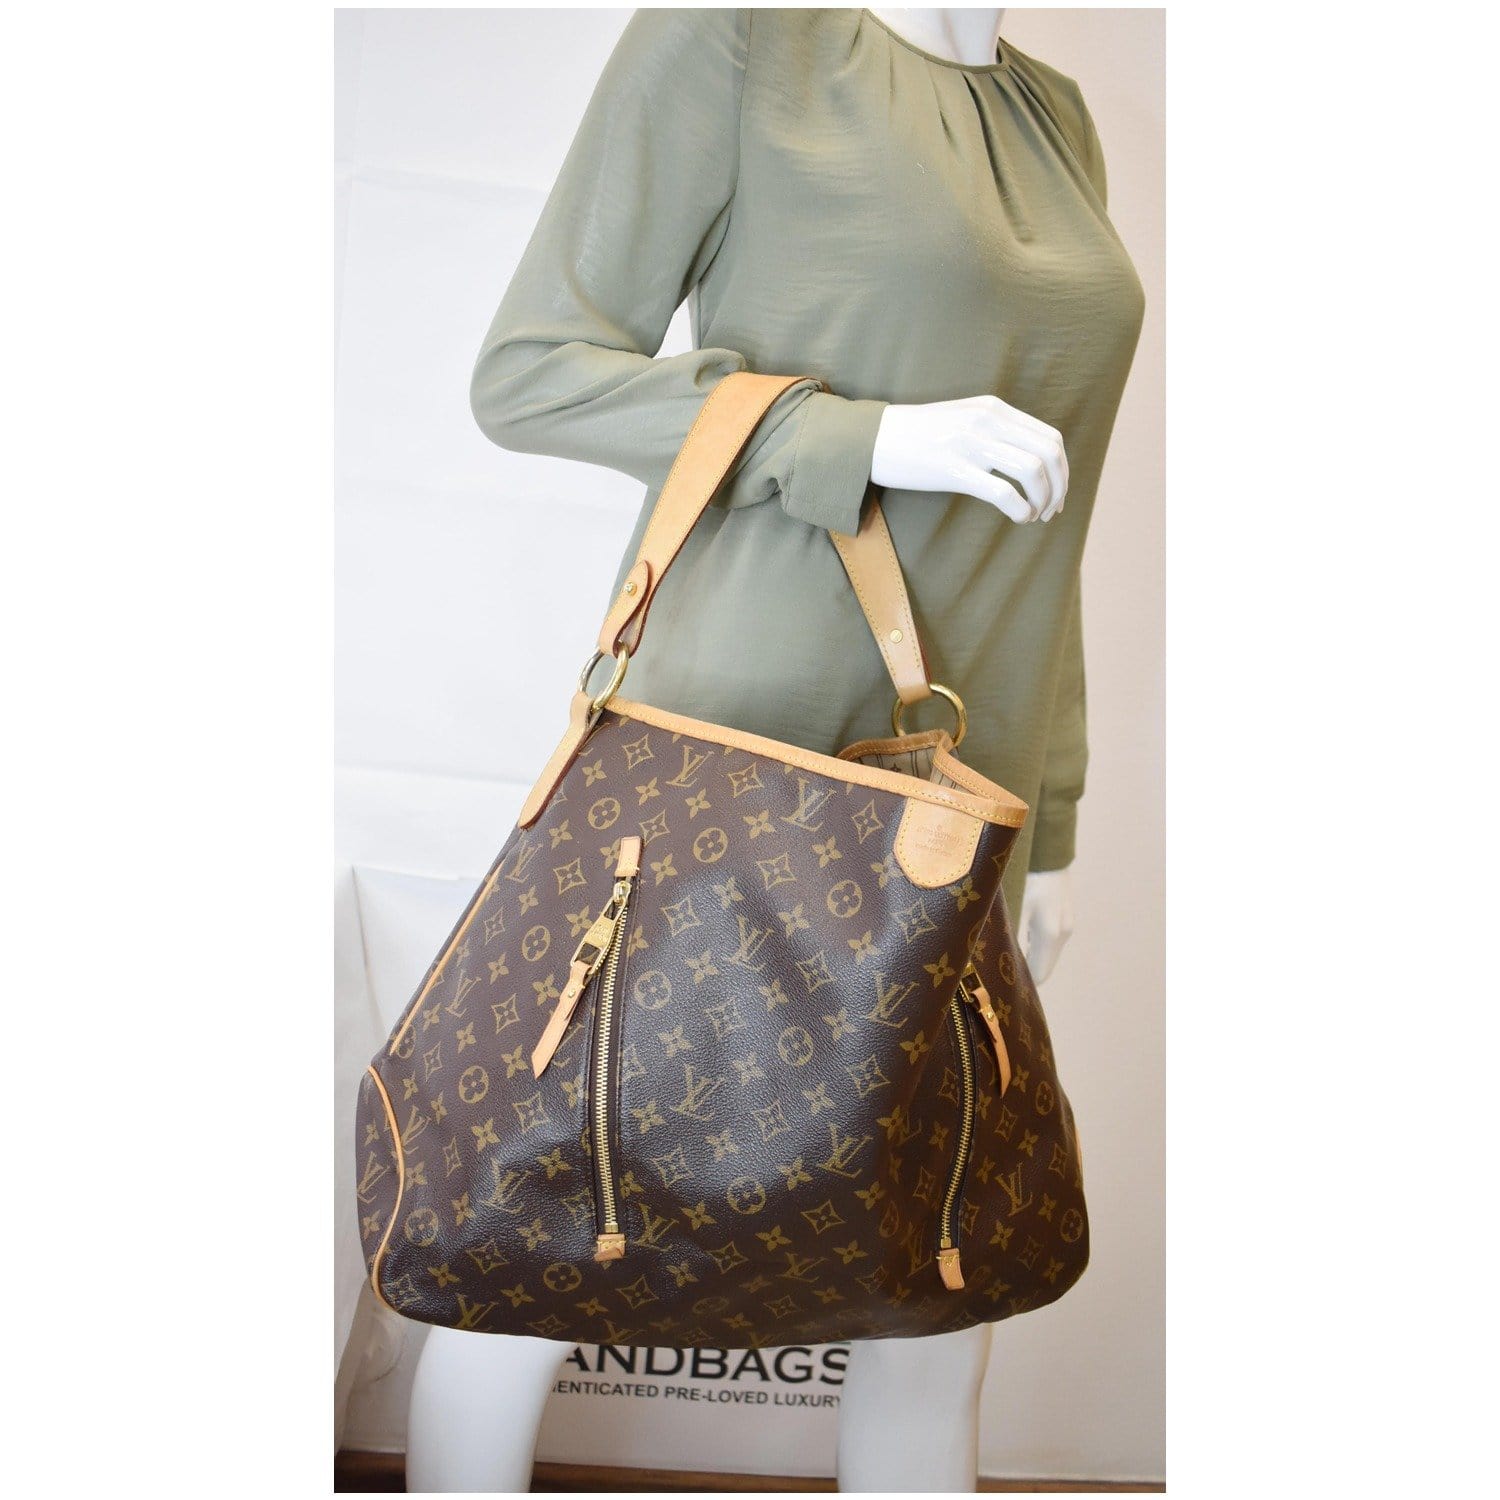 Good morning to a stunning LV Louise bag! #lv #louisvuitton #bags